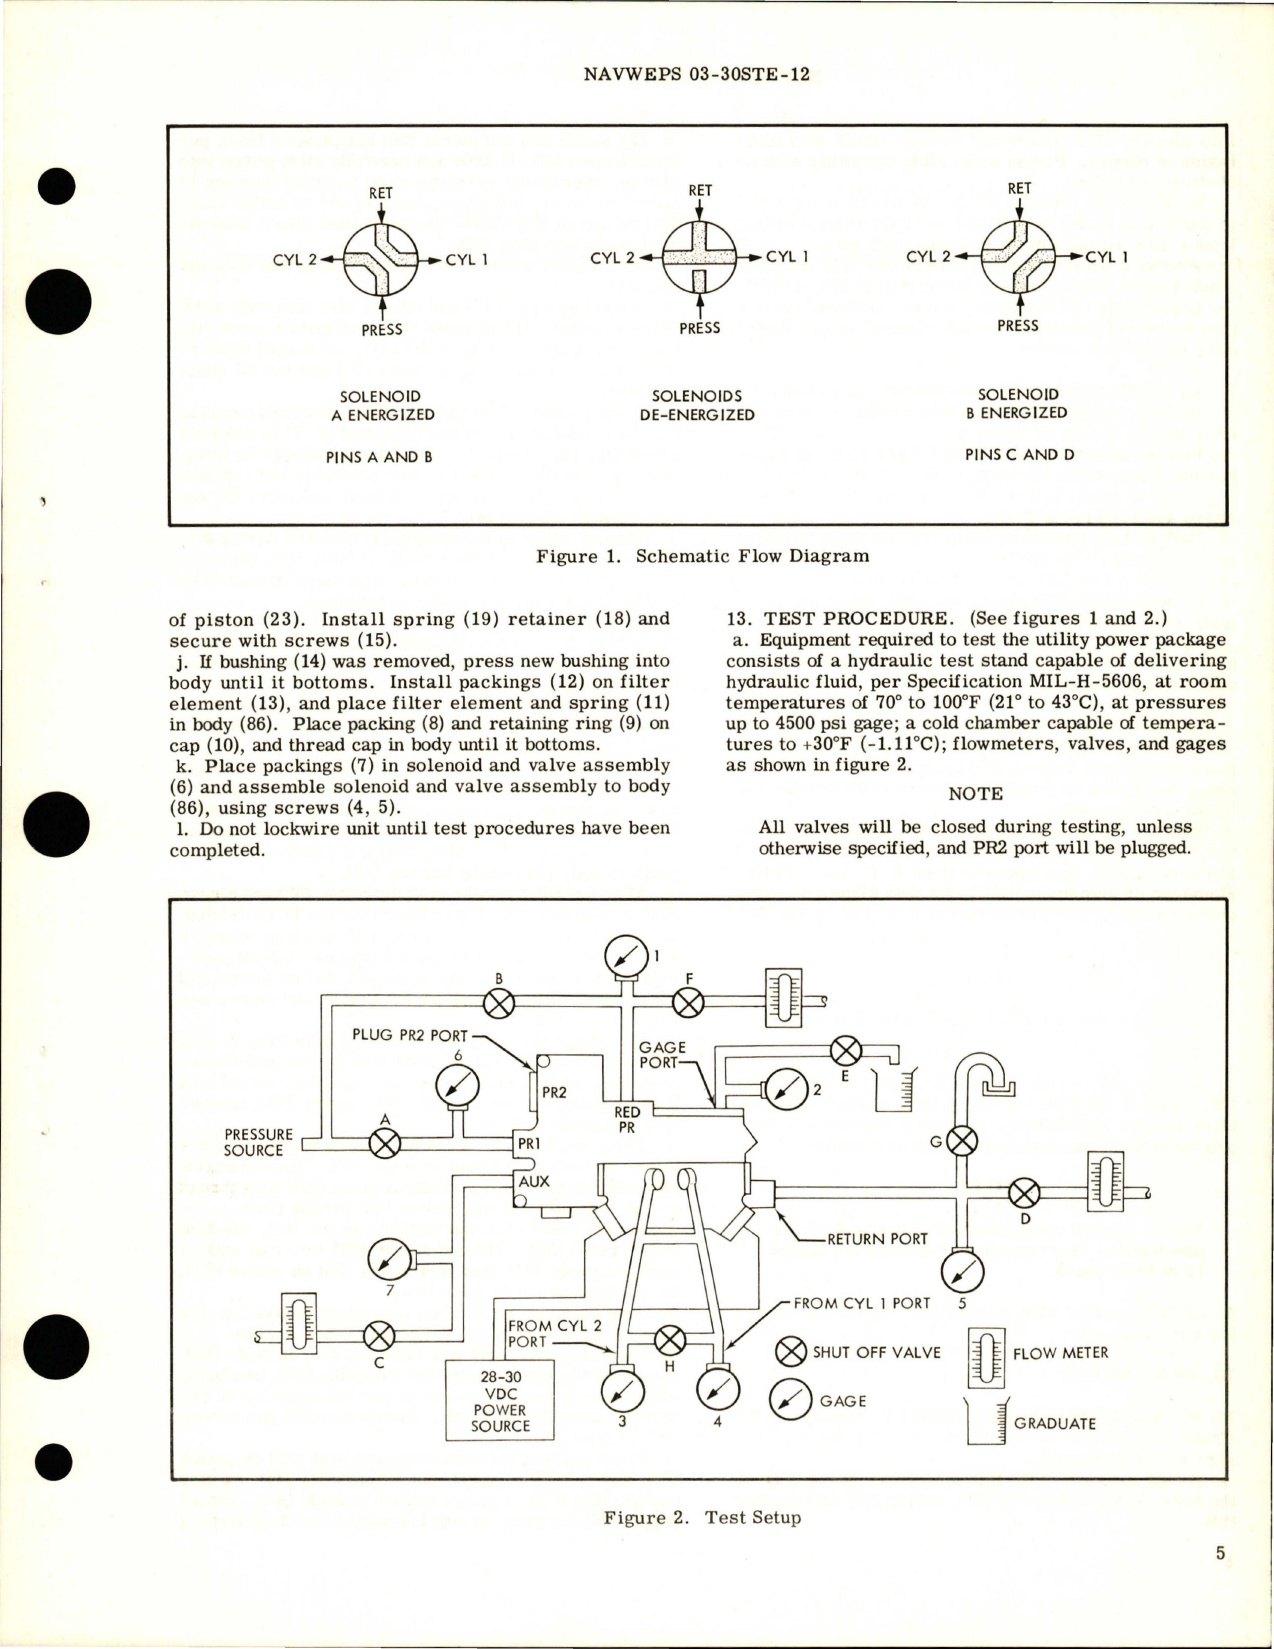 Sample page 7 from AirCorps Library document: Overhaul Instructions with Parts Breakdown for Utility Power Package - 3000 PSIG-10GPM - Part 12140-3R10-1 and 12140-3N10-1 